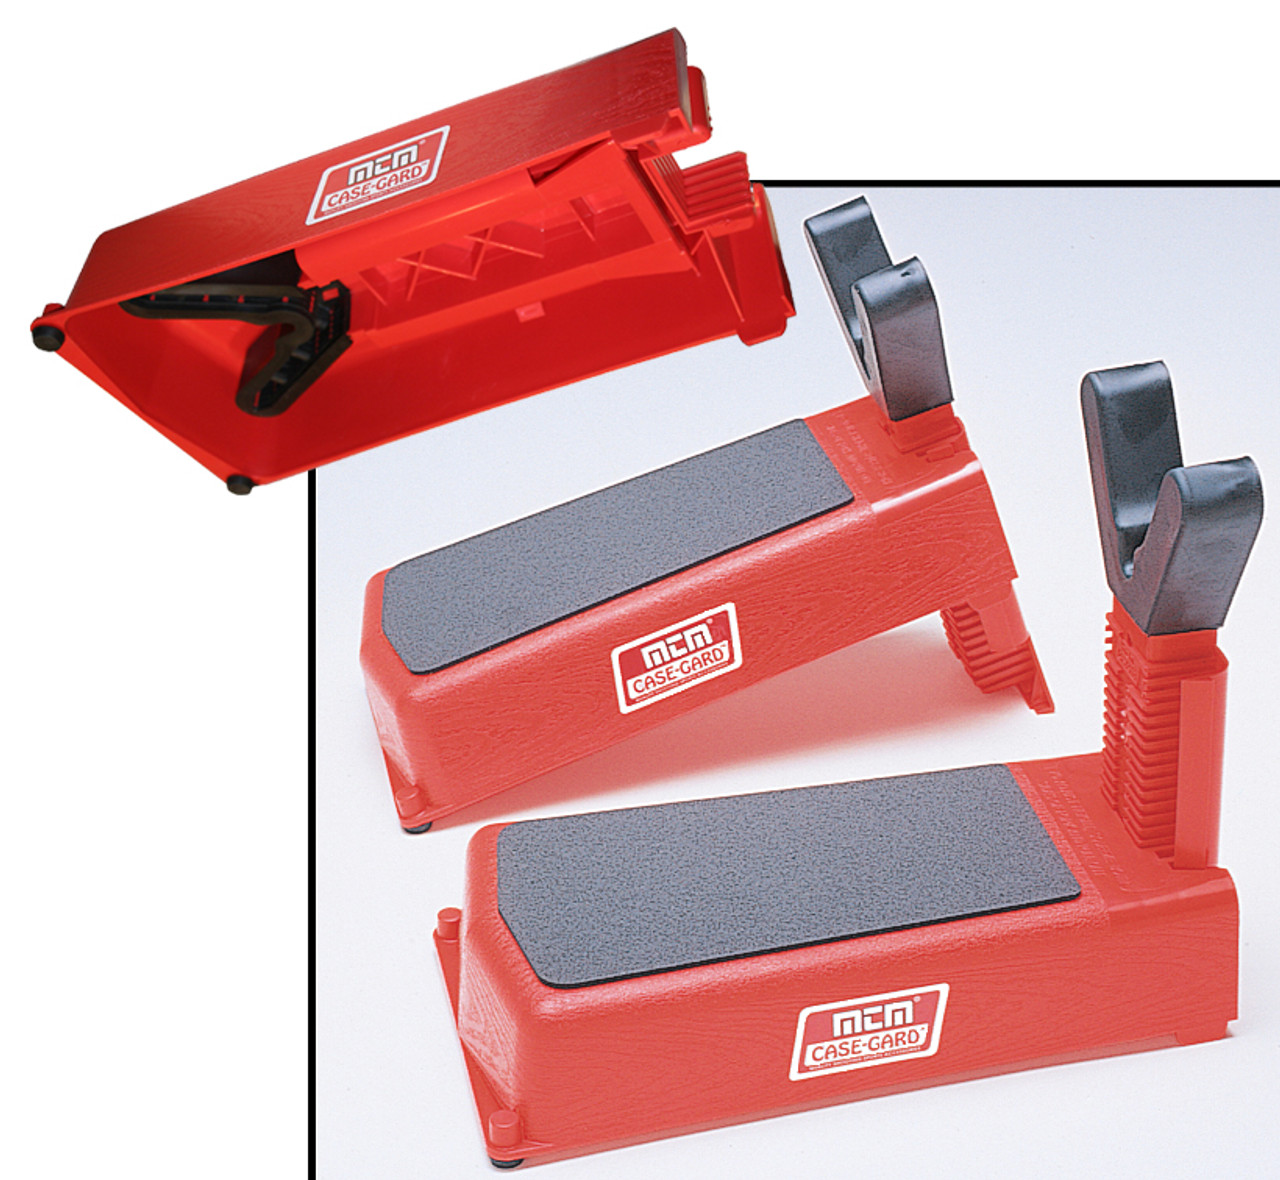 Because every box of ammo is slightly different, MTM has developed this pistol rest to take the mystery out of each box. The MTM pistol rest is so versatile that it will accommodate a Derringer to a 14" Contender. The base locks into the fork at 20 different positions. Rubber padding is molded to the fork to protect your handgun. The rest was designed to be used without a sandbag, but they can be used with it. When not in use the fork has been designed to clip into the bottom of the base for compact storage. Made of tough polypropylene to last. Color: Red.

MTM Pistol Rest has adjustable base that locks into the fork at 20 different positions
Accommodates anything from a Derringer to a 14" Contender
Designed to use without sandbag, but may be used with one
Pistol Rest's fork features MTM's special "over-molded" rubber coating to protect and grip handgun
Color: Red; Tough polypropylene; Made in USA